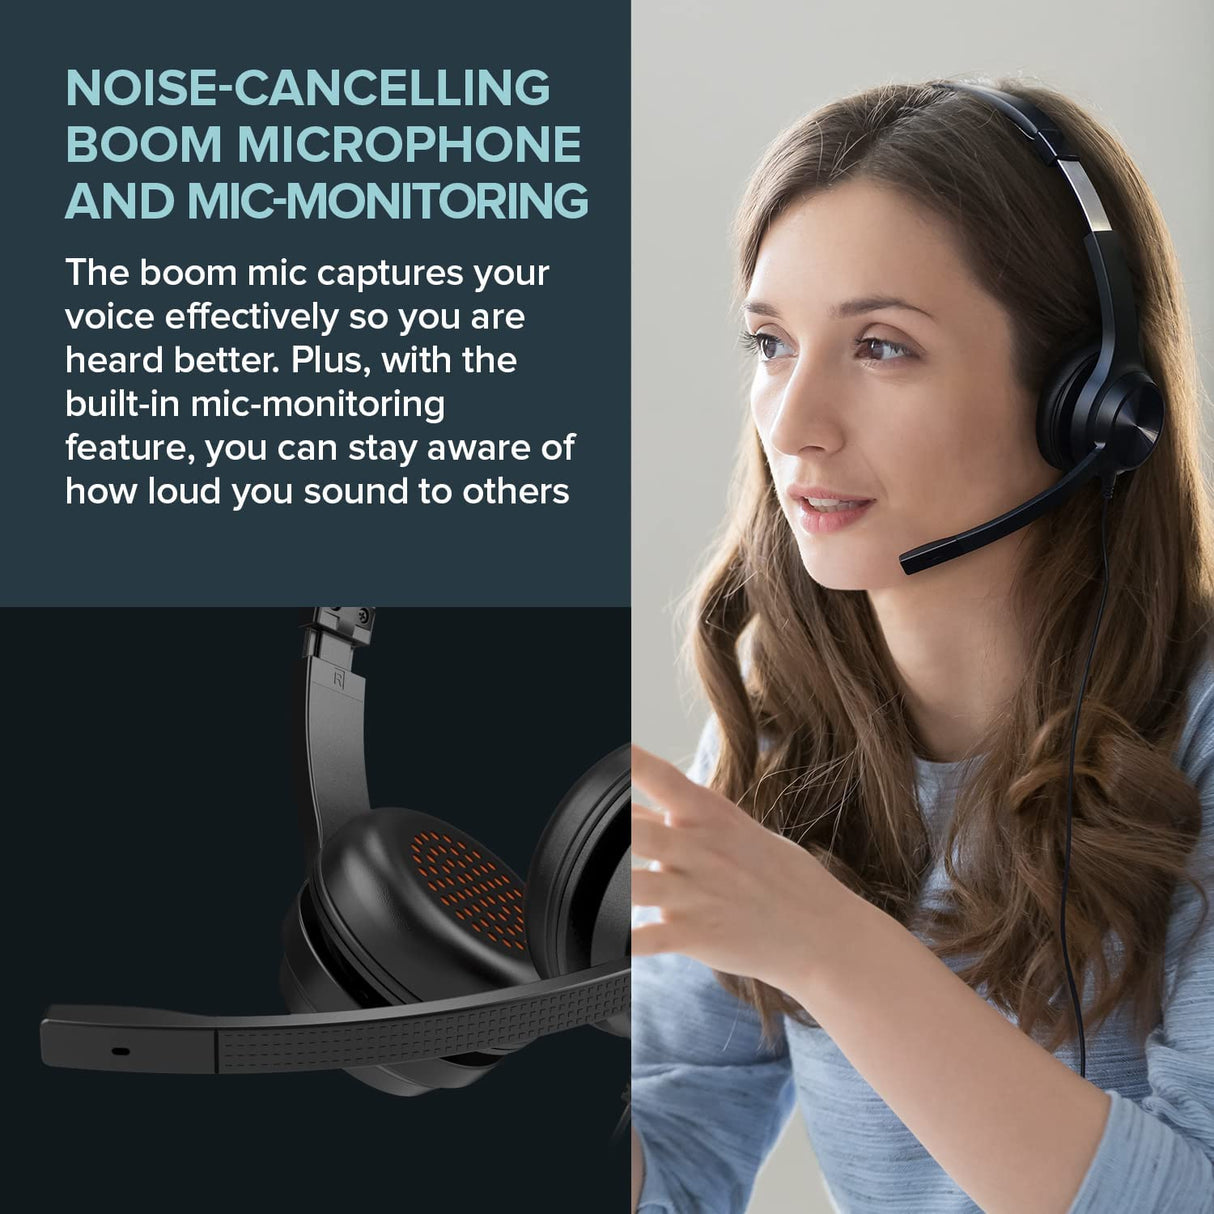 Creative Chat USB On-Ear Headset with Swivel-to-Mute Noise-Cancelling Boom Mic, Mic-Monitoring, SmartComms Kit, Playback and Calls Control for PC, Mac, Consoles USB-C Headset